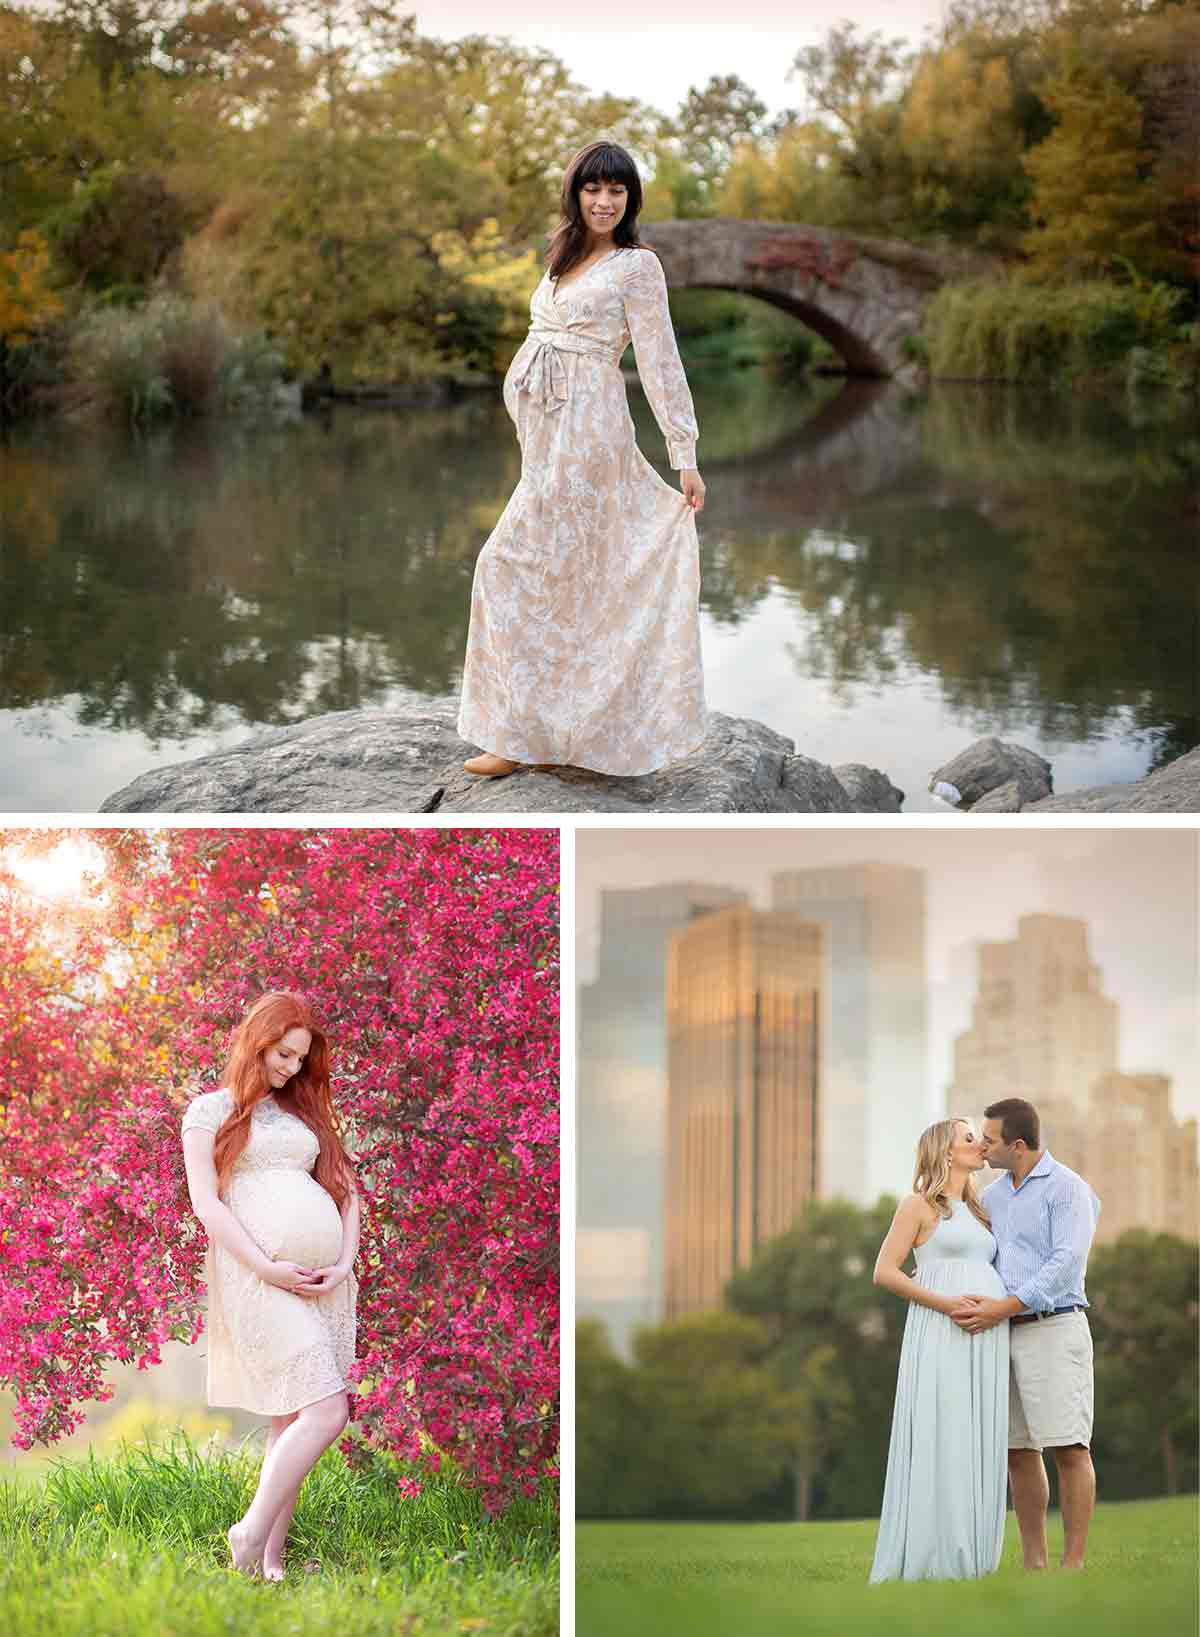 Romantic maternity photo sessions in NYC's beautiful Central Park